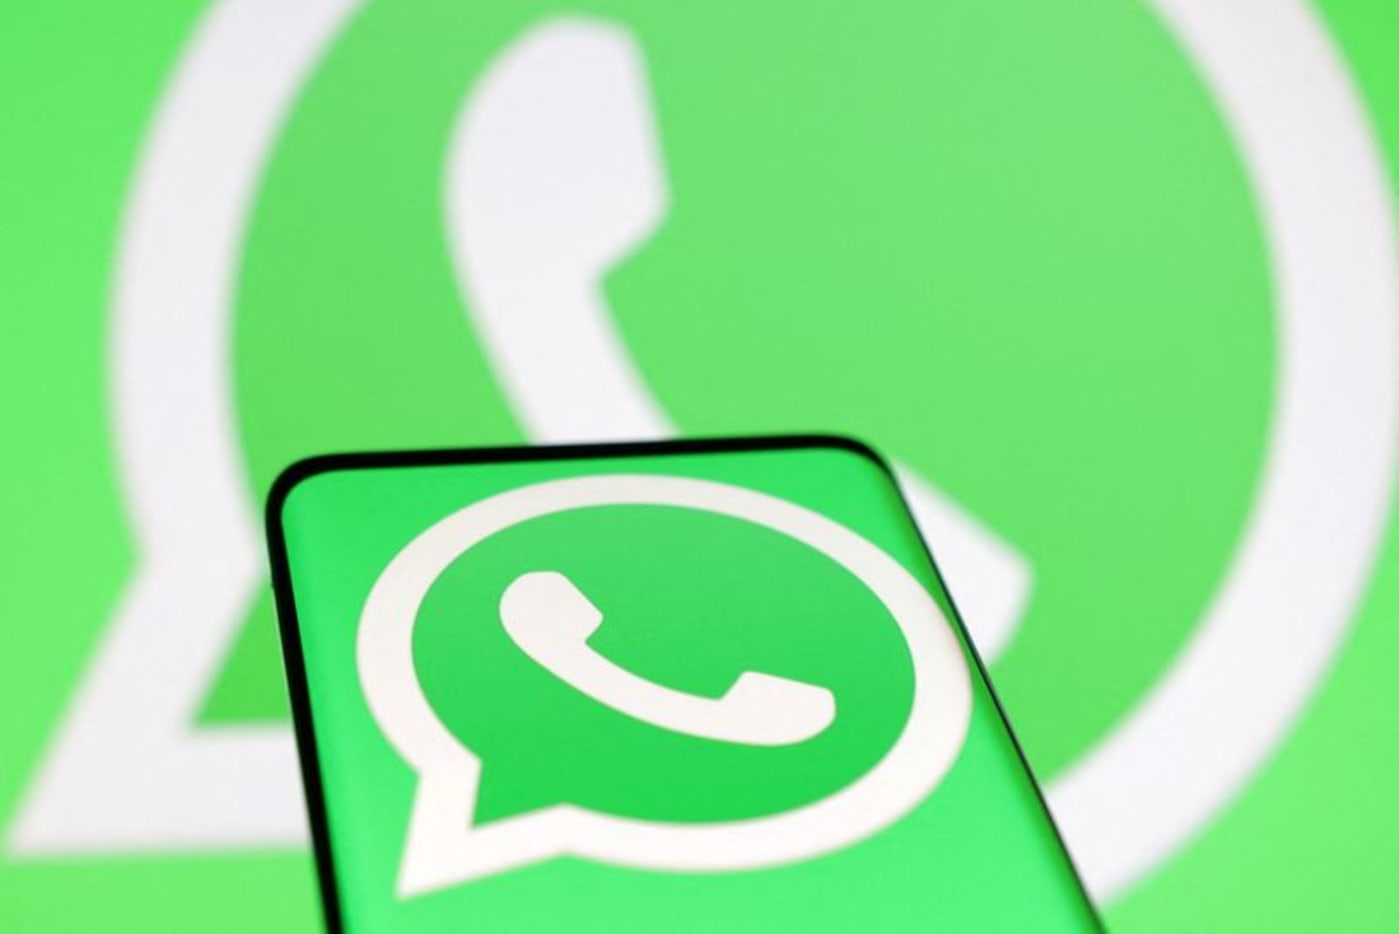 WhatsApp may soon offer its own AirDrop-like file sharing feature